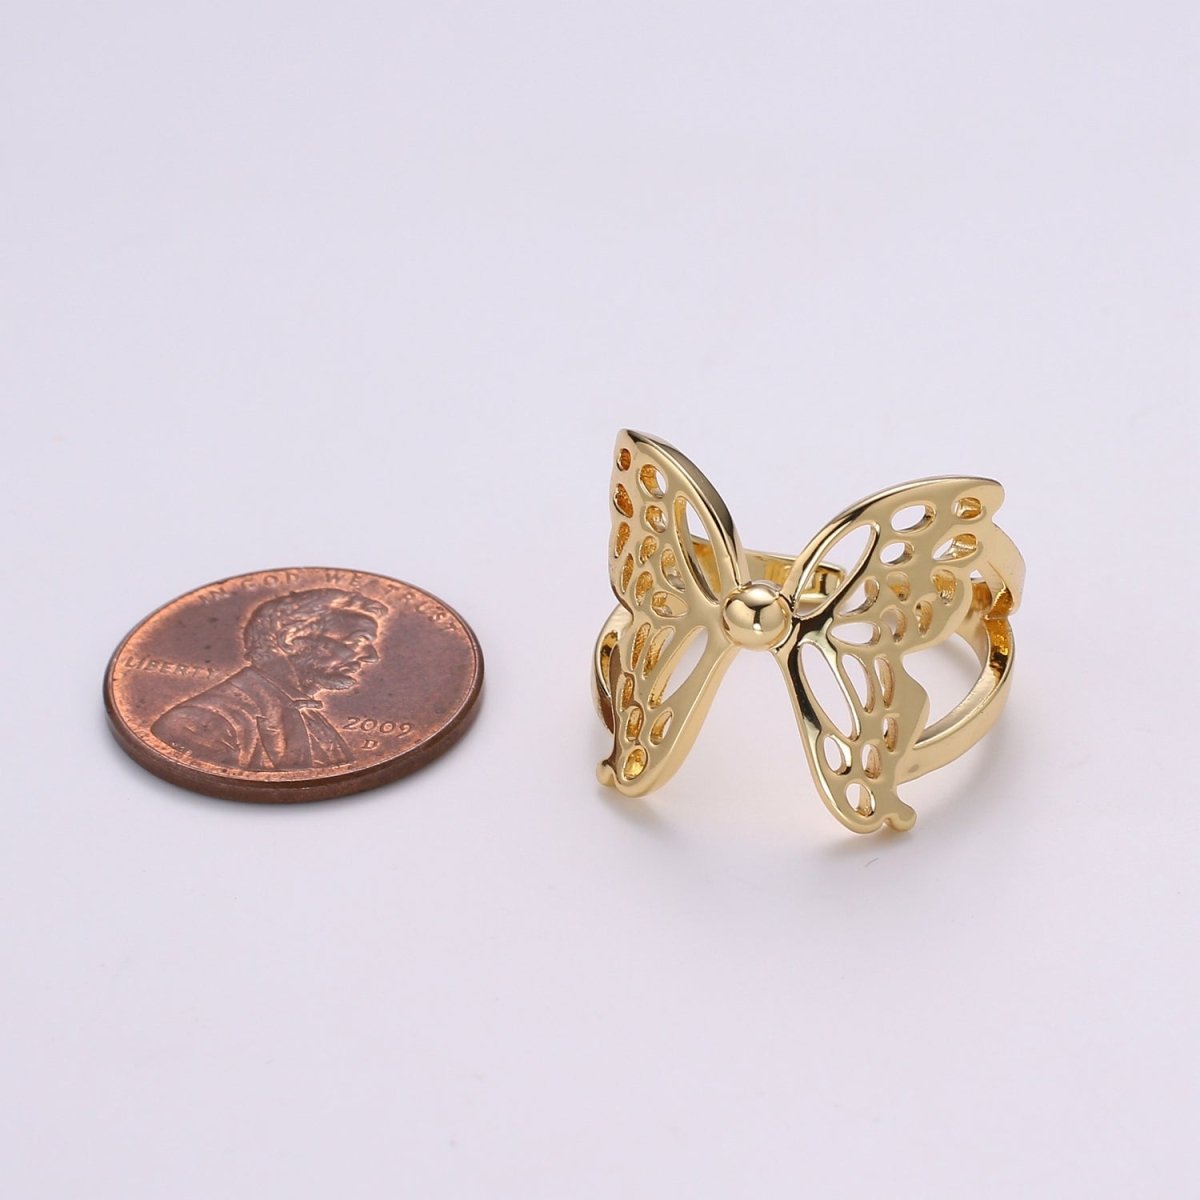 Dainty Butterfly Ring, Adjustable Gold Ring, Simple Mariposa Ring, Animal Lover Ring for Minimalist jewelry Everyday Wear R500 - DLUXCA